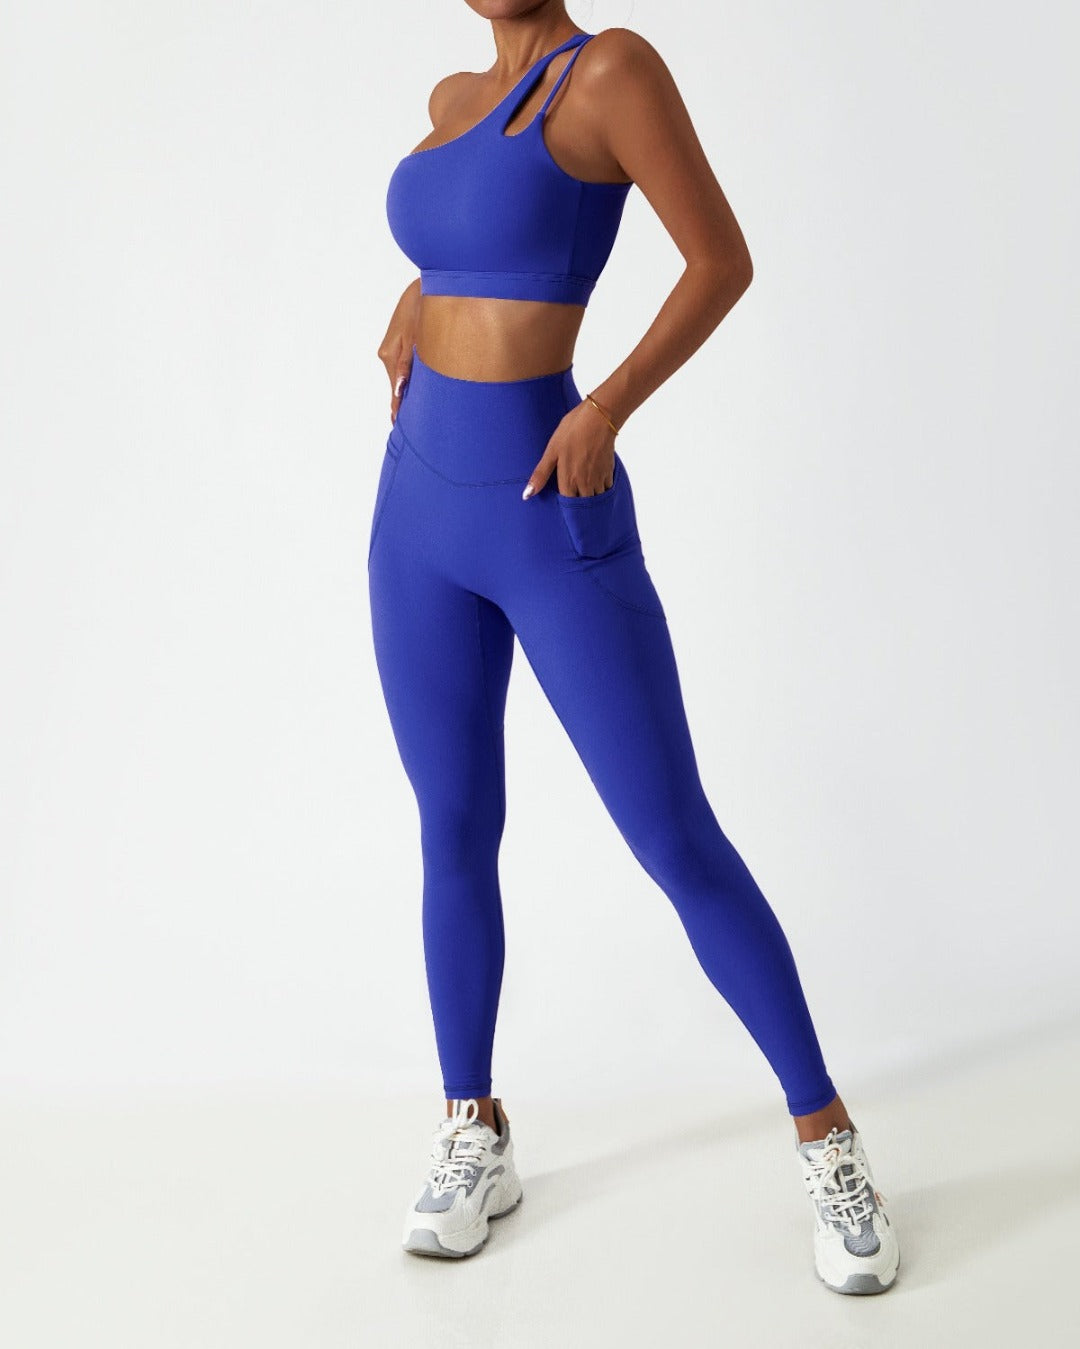 Klein Blue Buttery Smooth Leggings